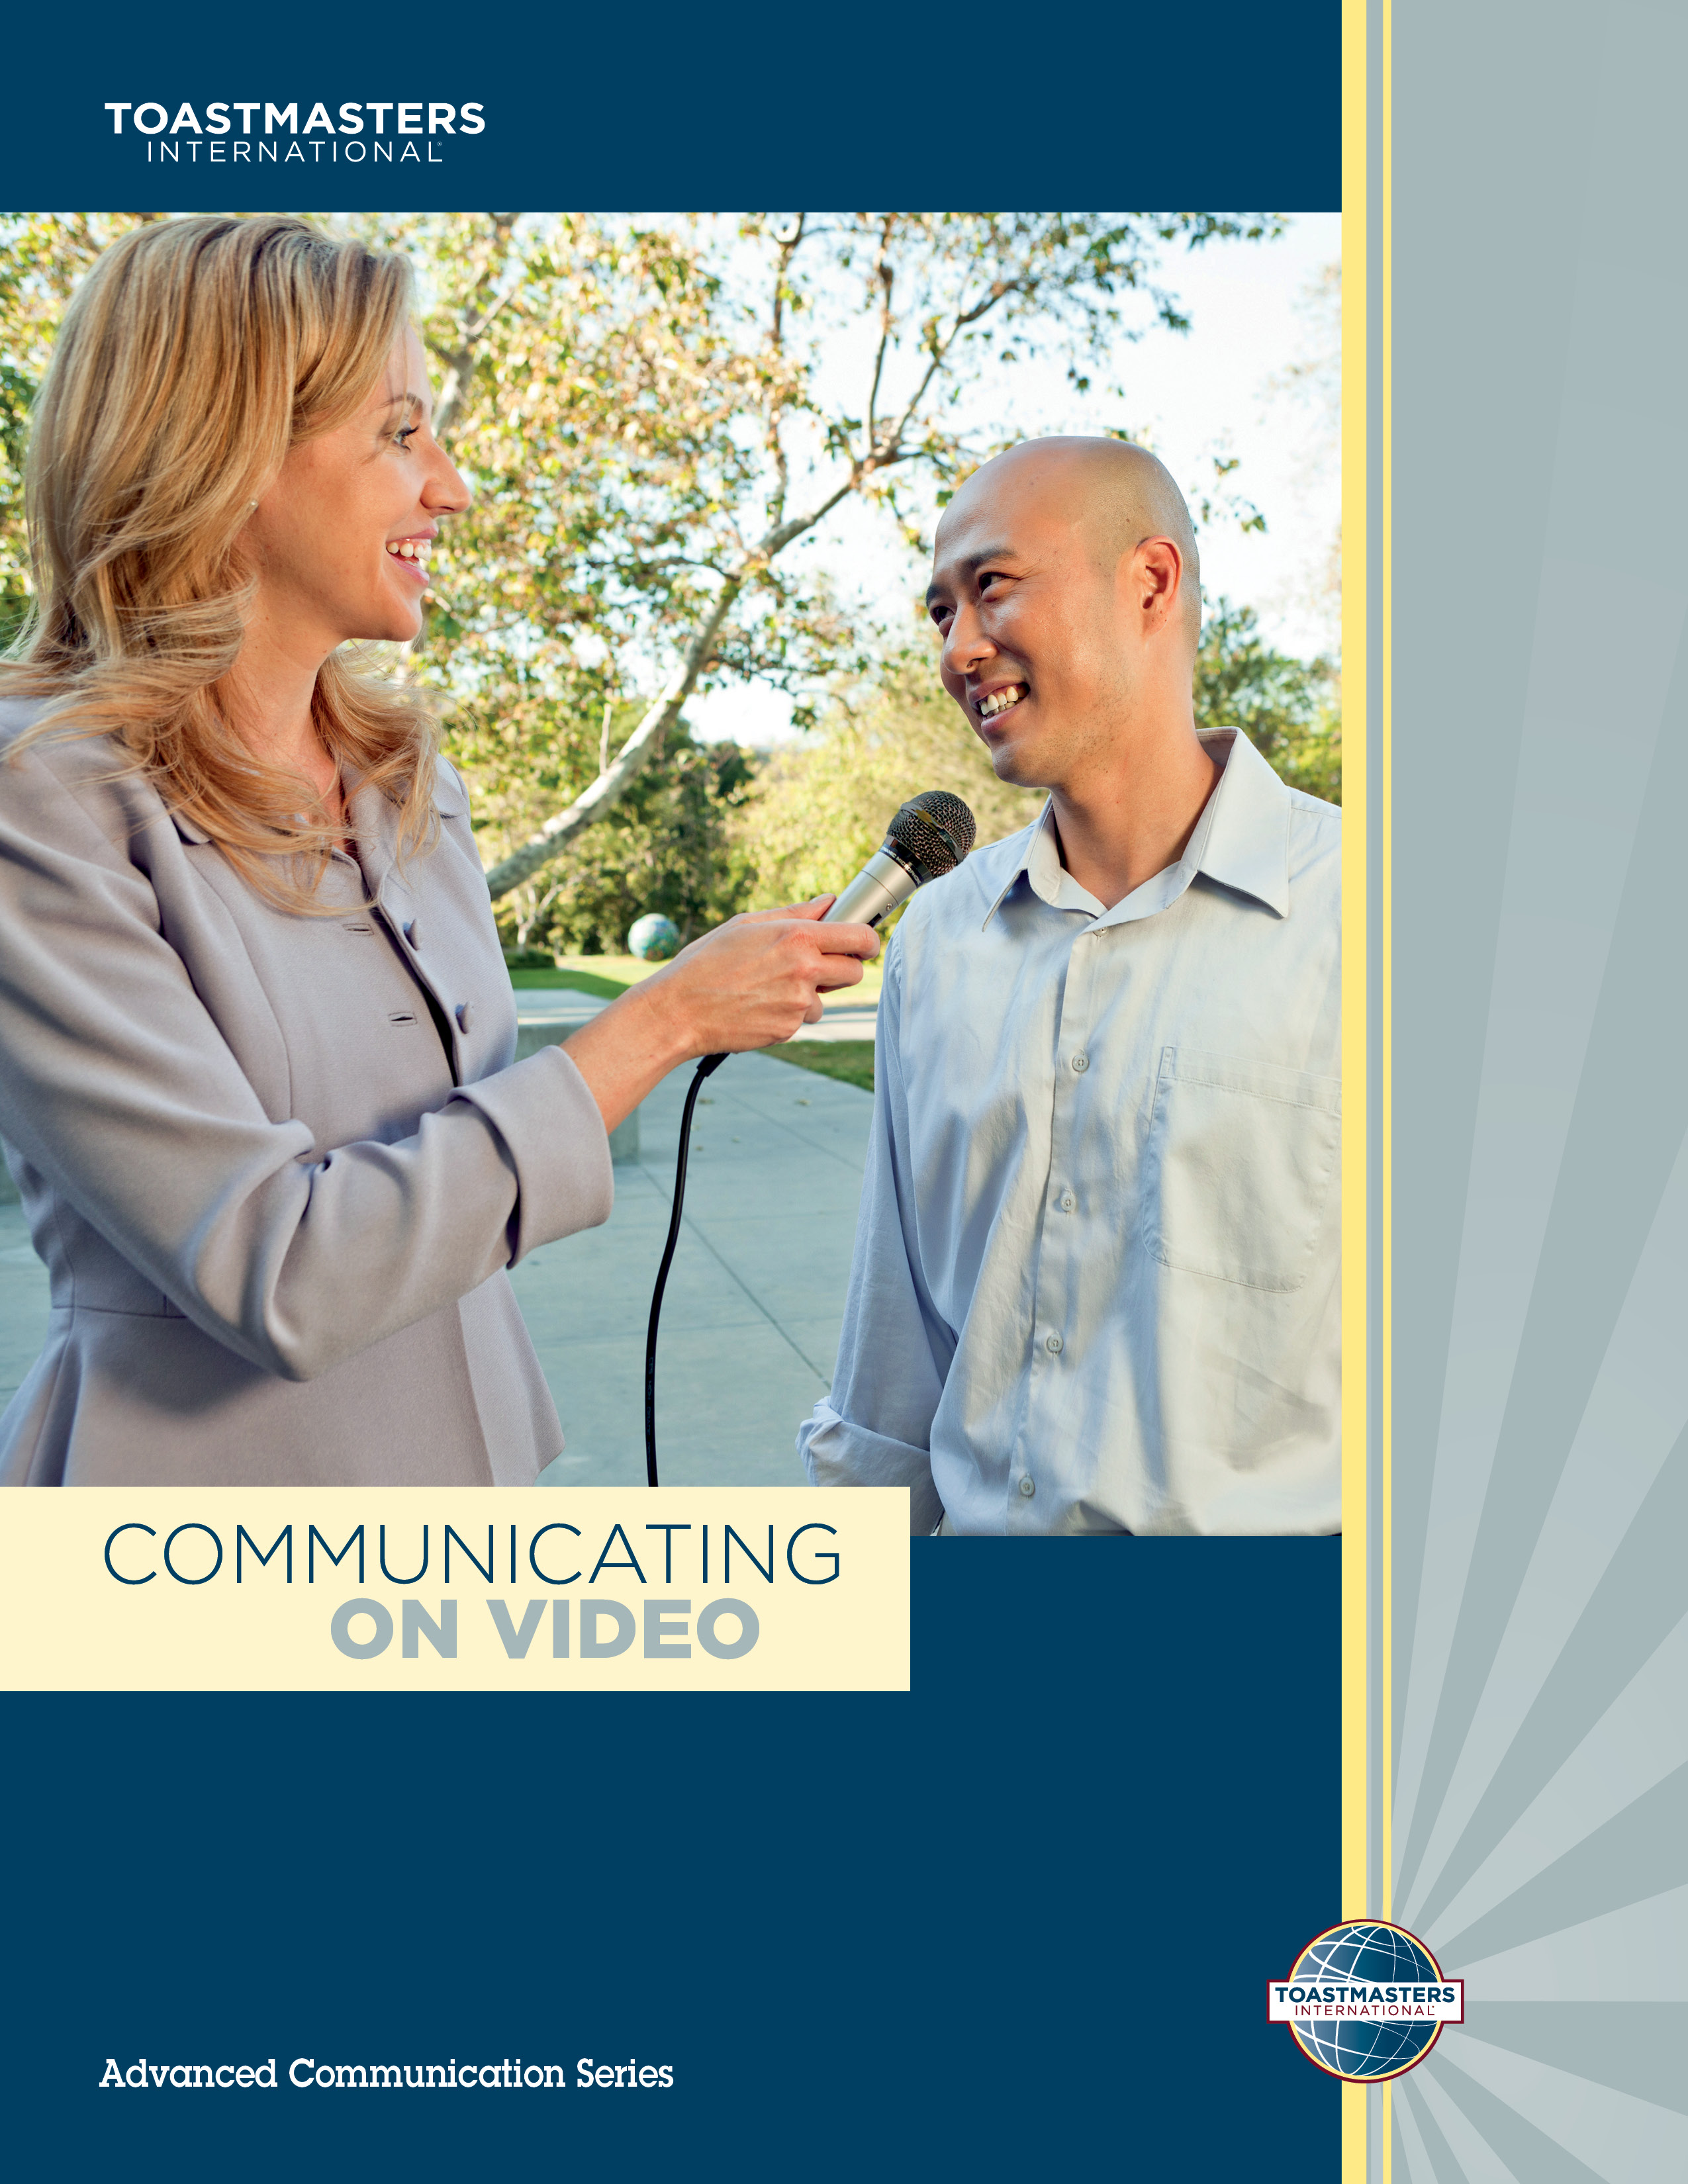 Cover of the "Communicating On Video" advanced manual